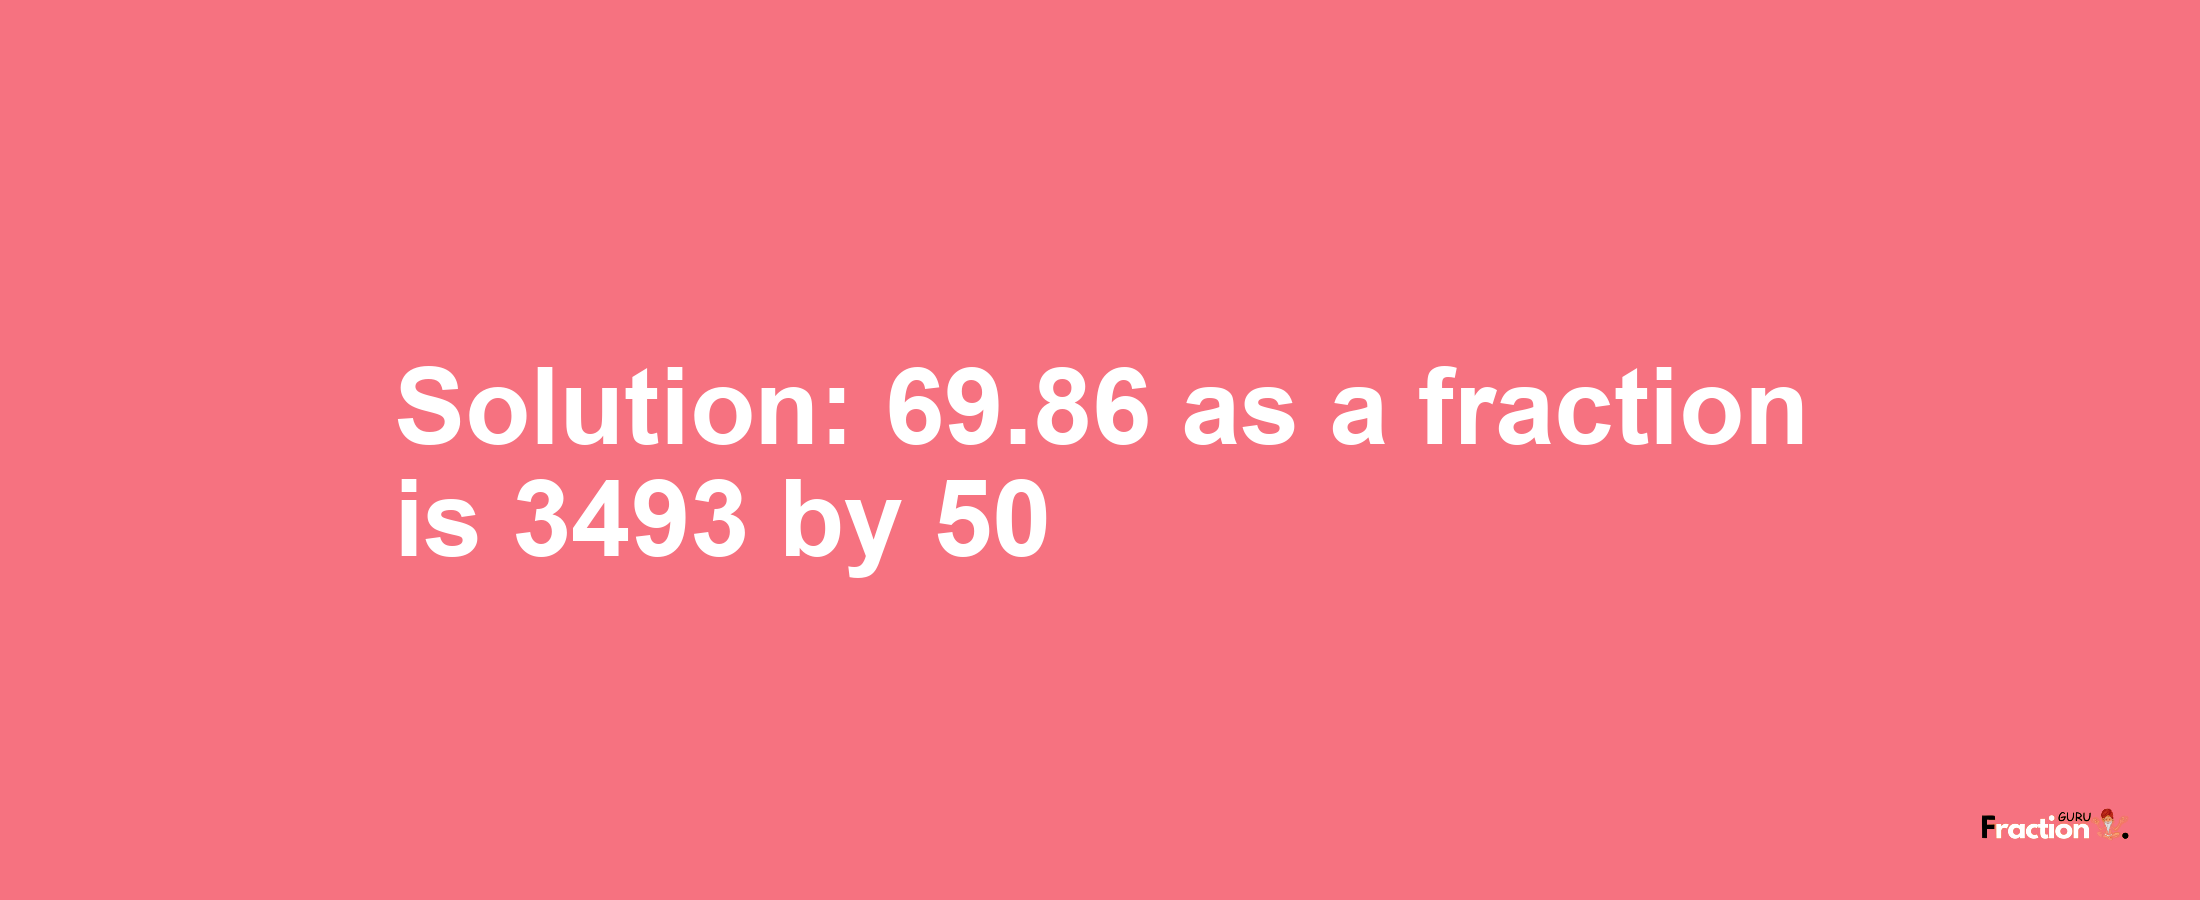 Solution:69.86 as a fraction is 3493/50